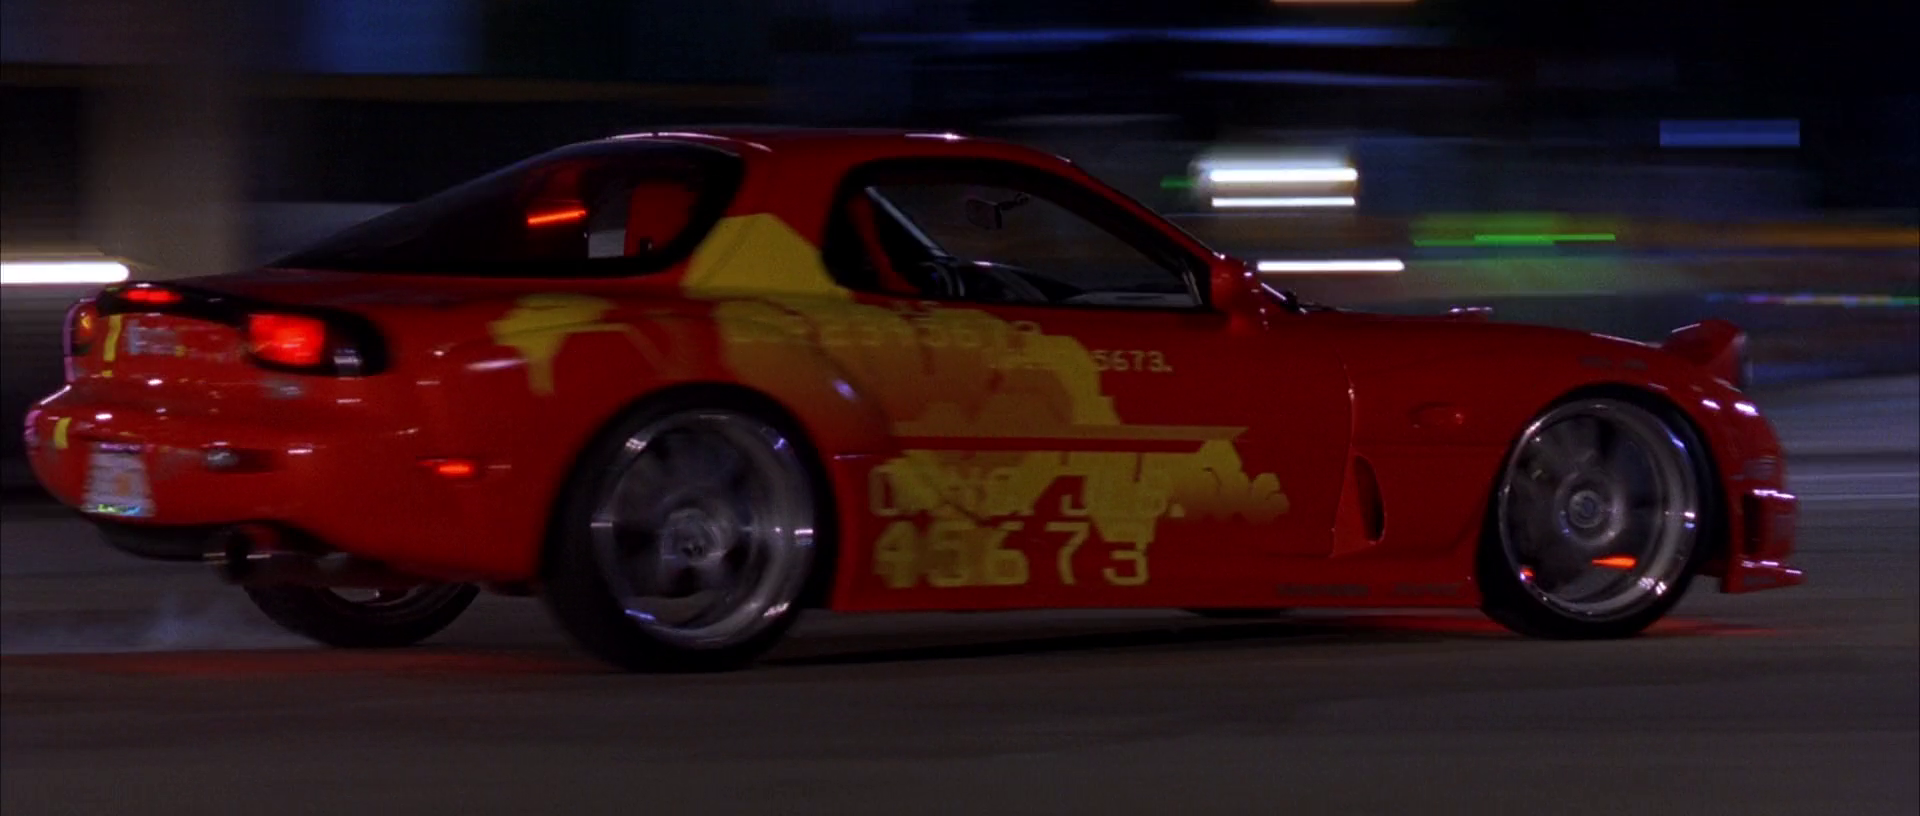 1993 Mazda RX-7 | The Fast and the Furious Wiki | Fandom